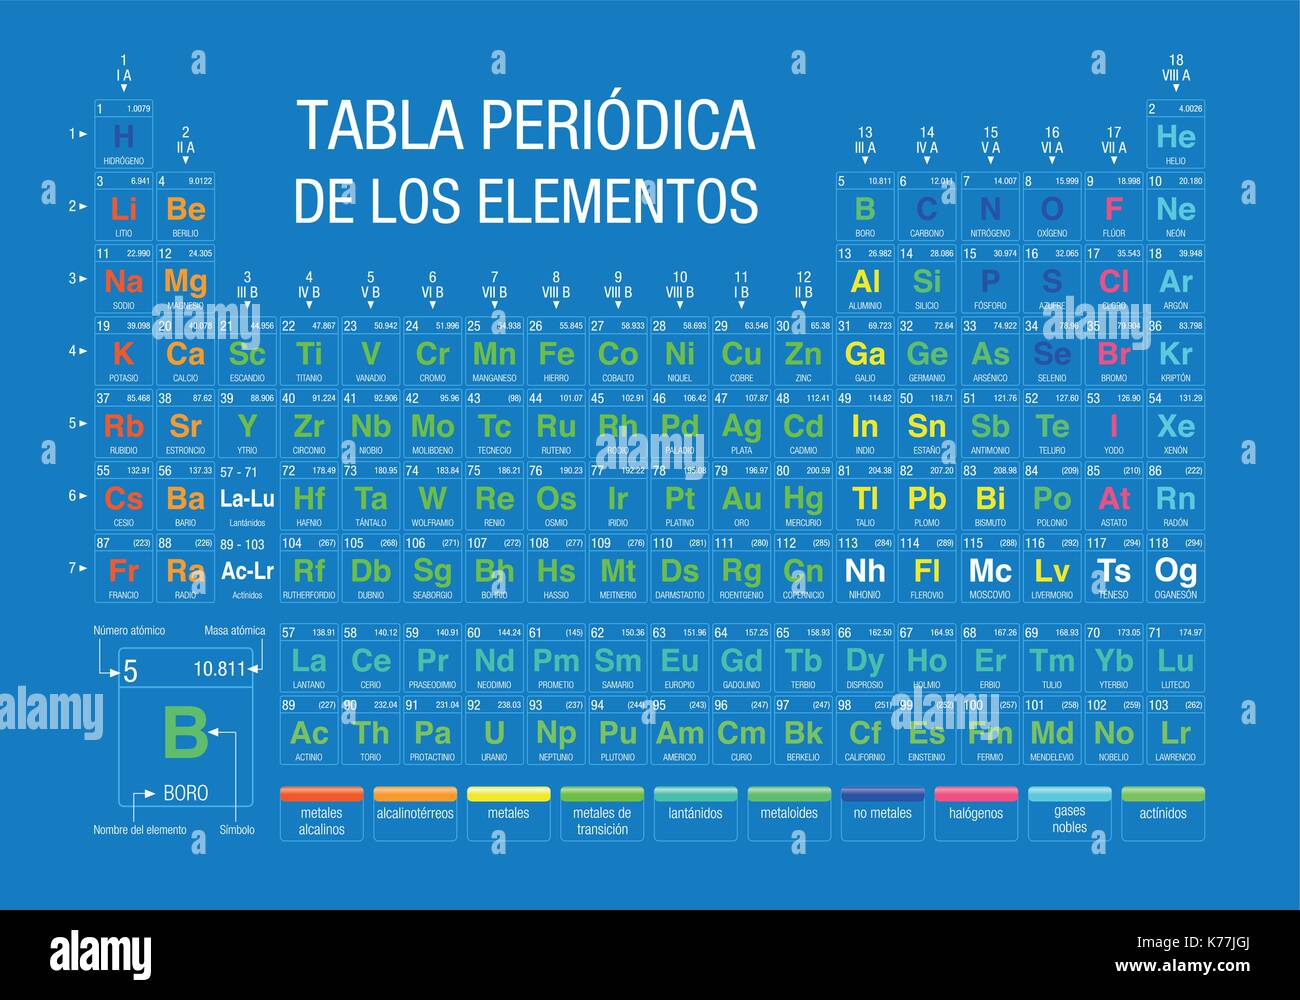 TABLA PERIODICA DE LOS ELEMENTOS -Periodic Table of Elements in Spanish language- on blue background with the 4 new elements included Stock Vector